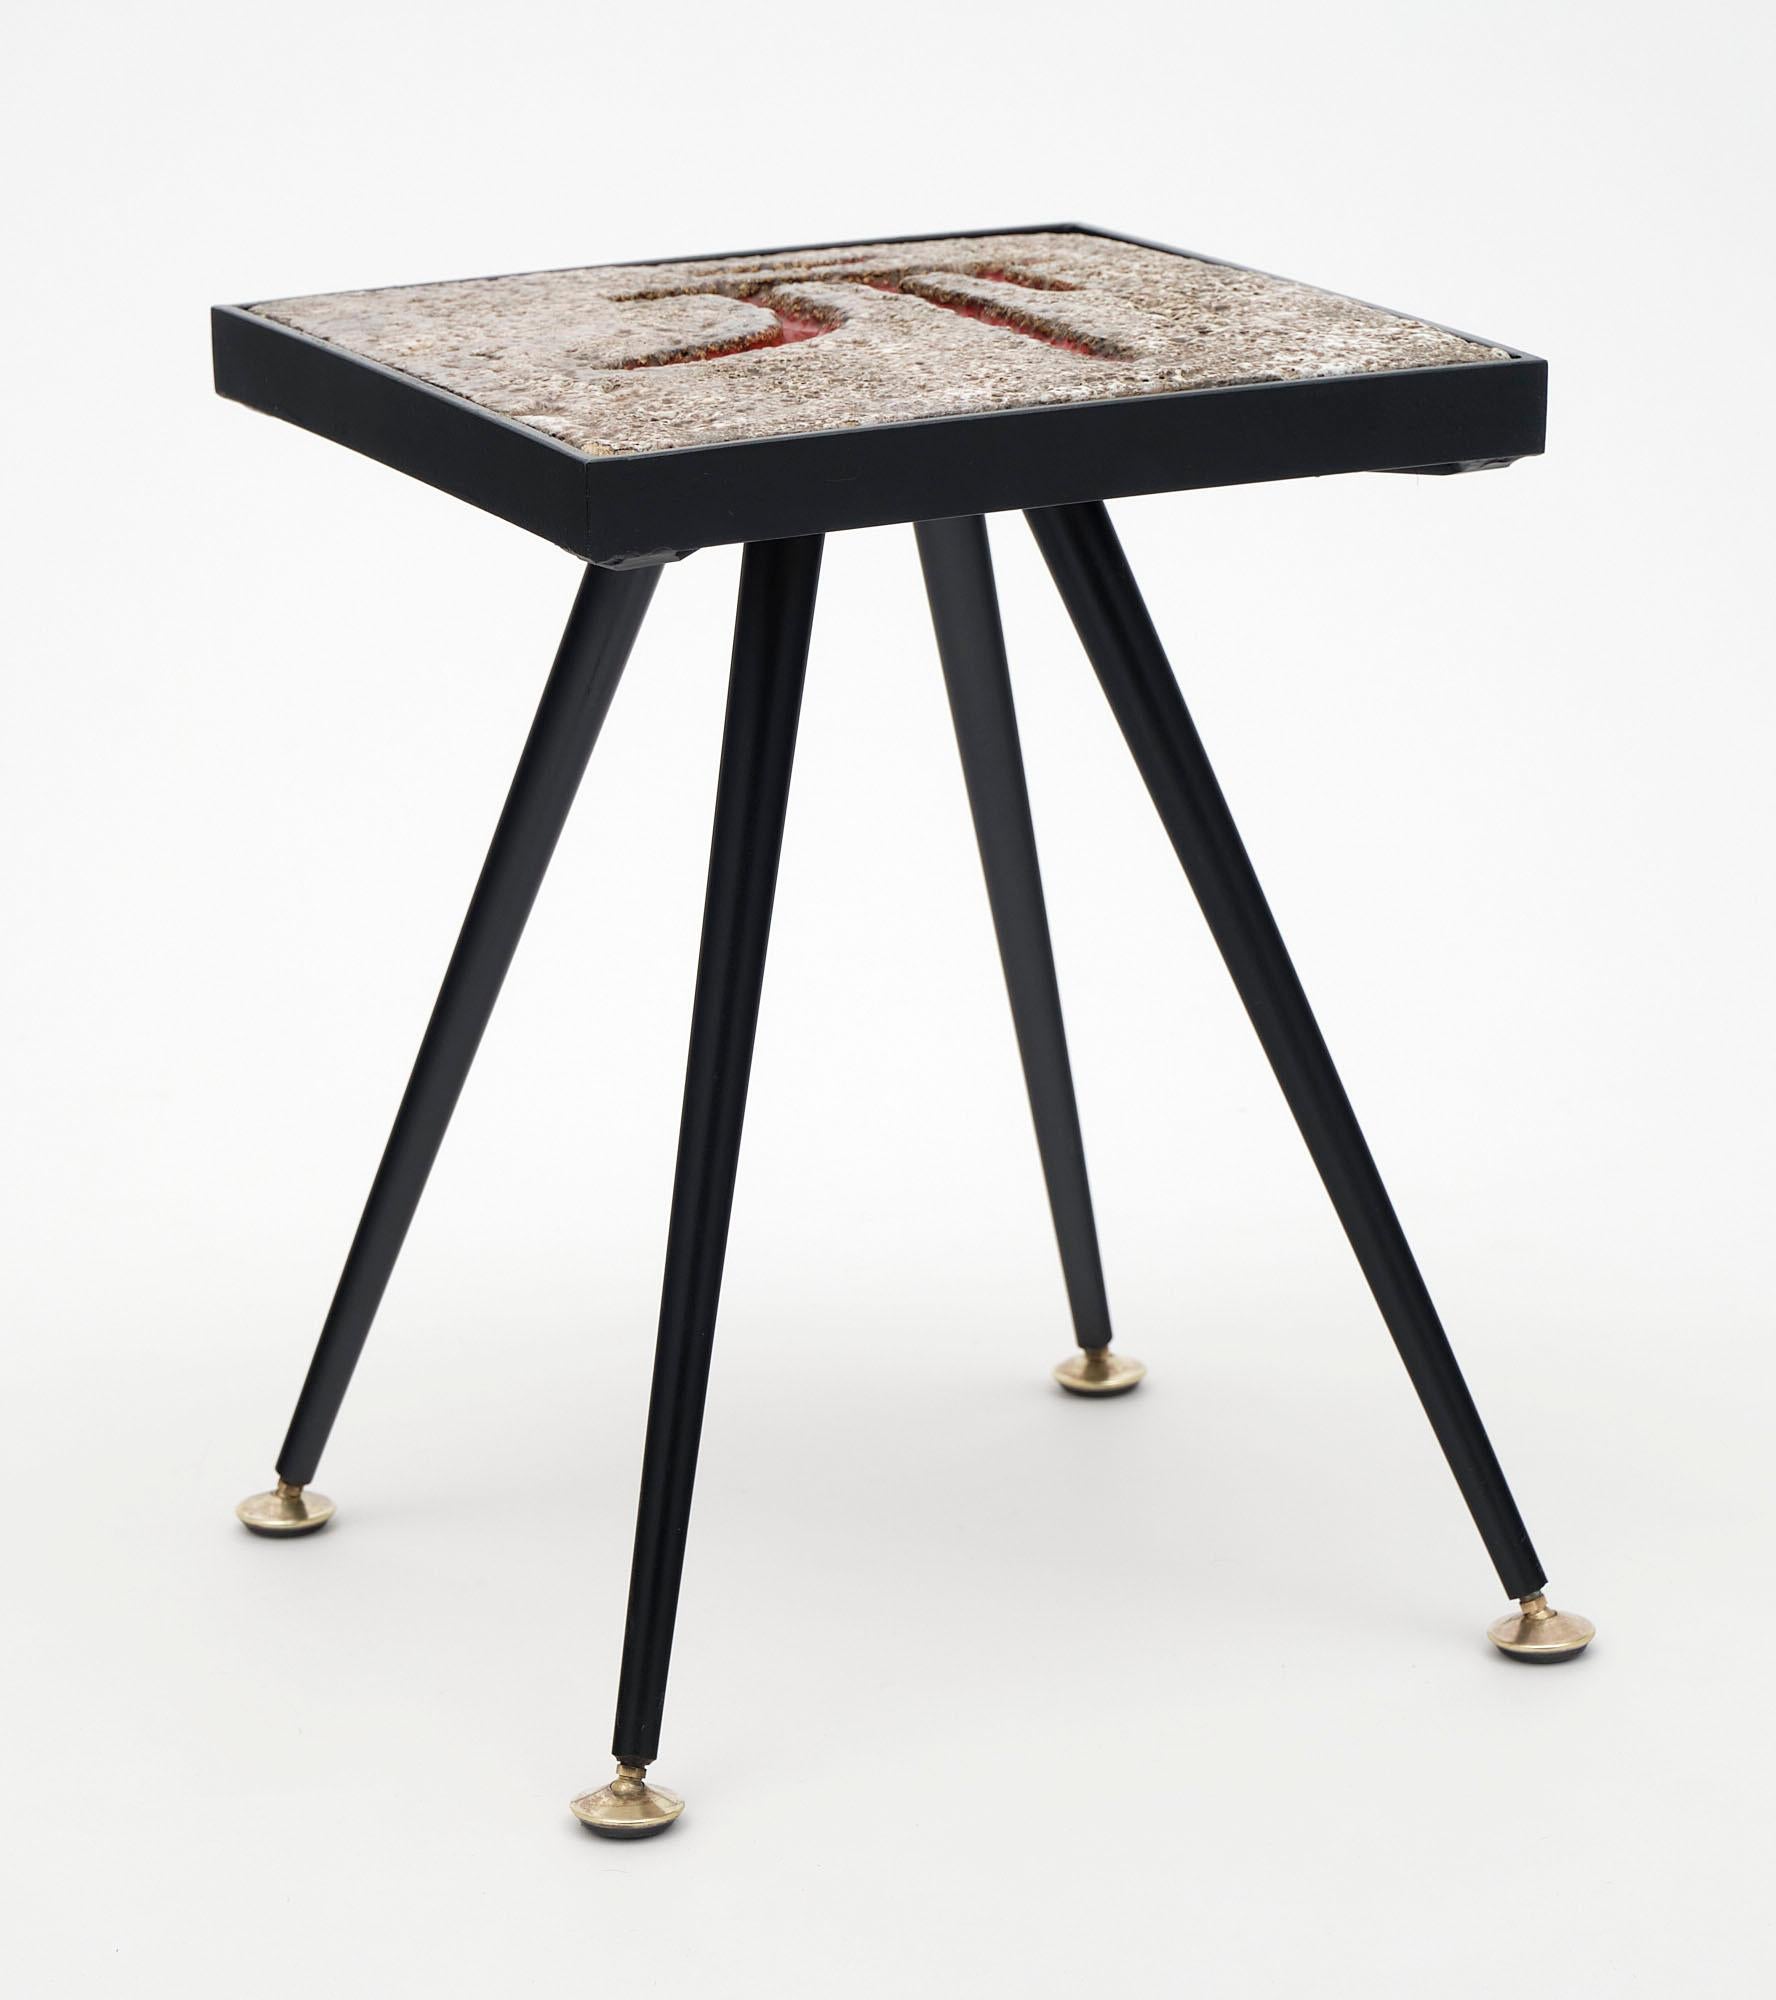 Side table from France made with painted textured ceramic top and black lacquered steel base.